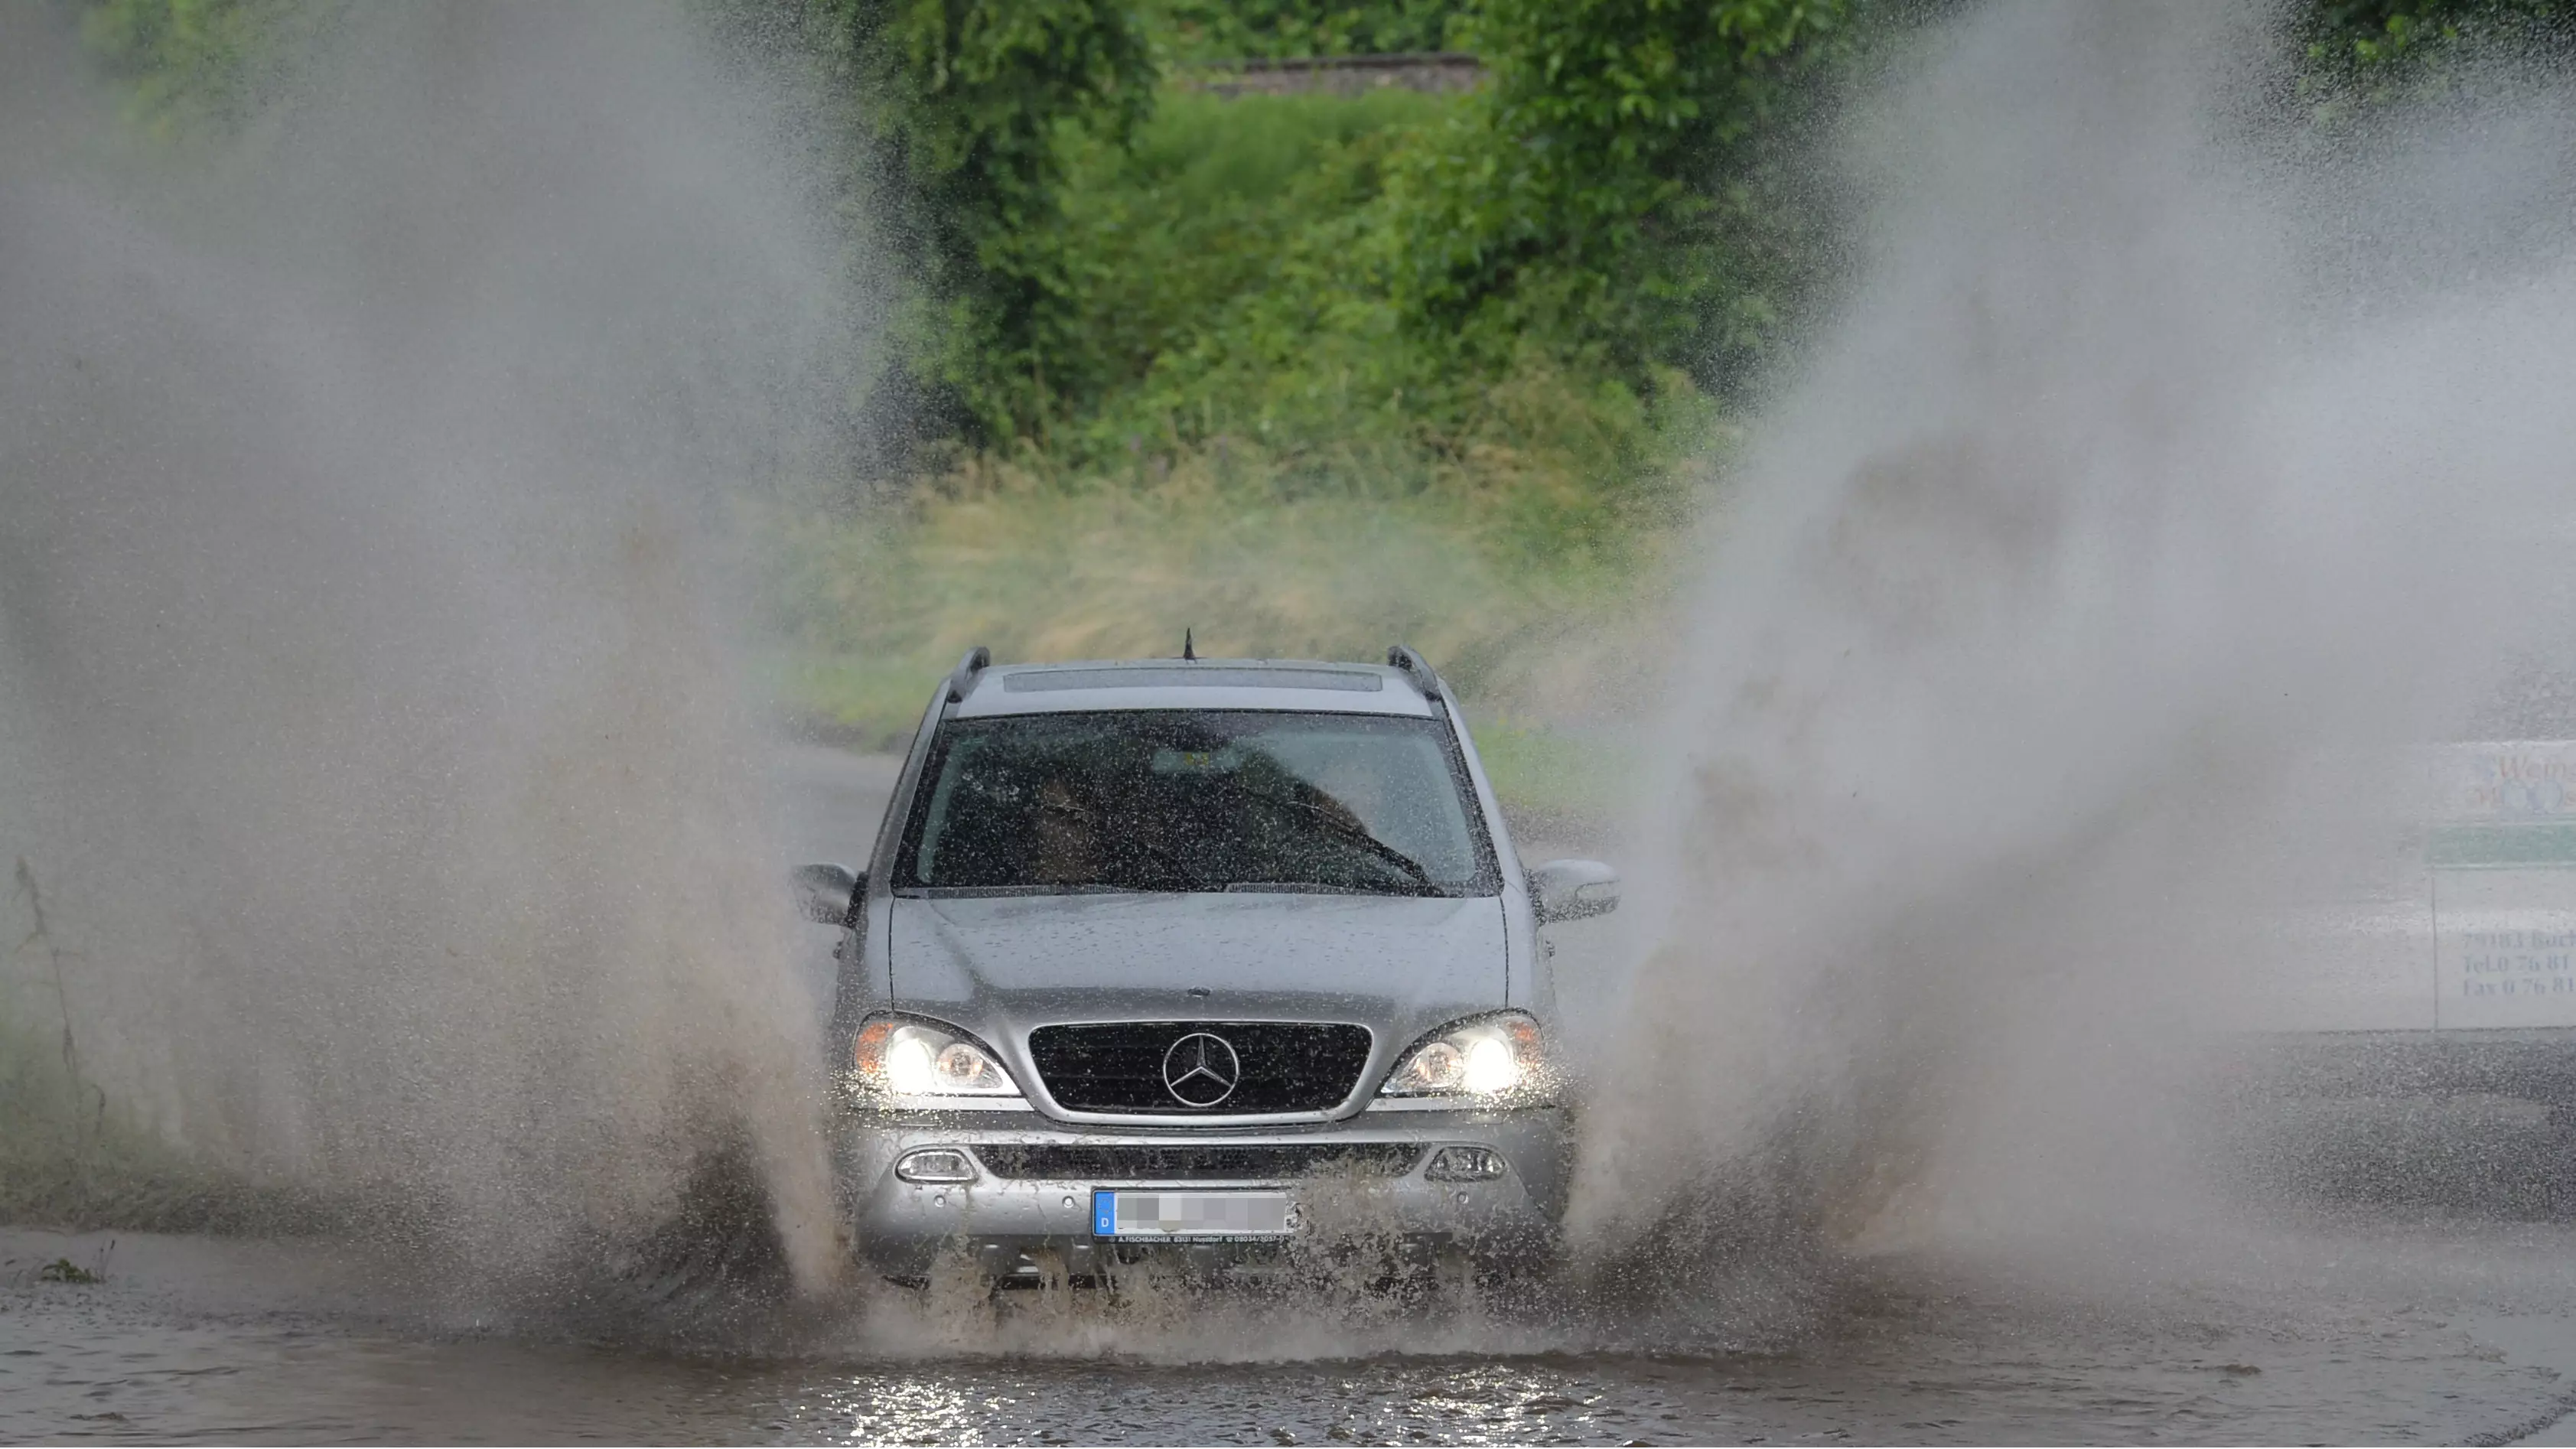 Drivers Could Be Fined £5,000 For Purposely Splashing Pedestrians